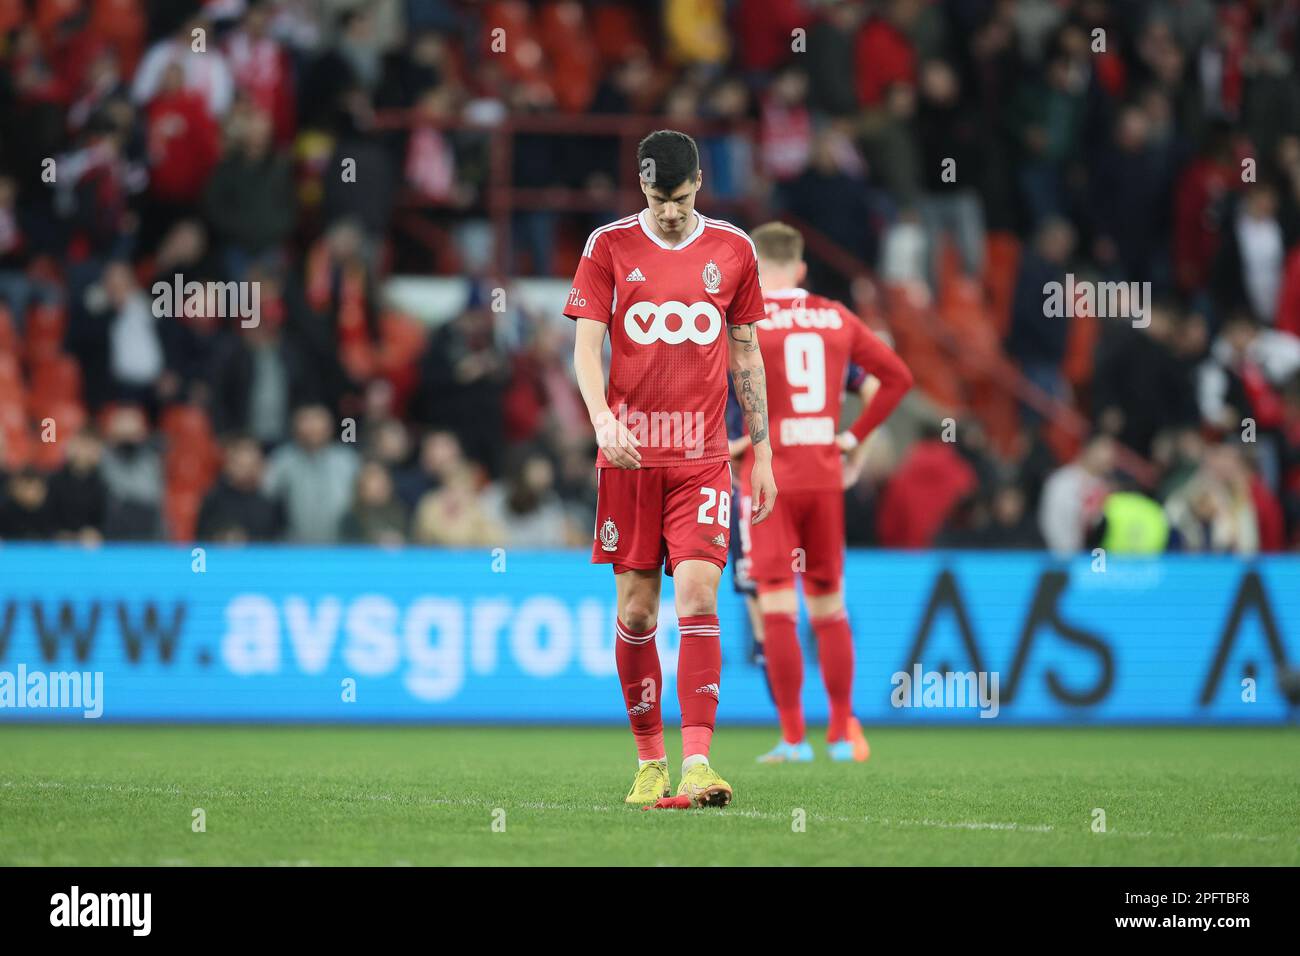 Standard's Stipe Perica looks dejected after a soccer match between Standard de Liege and SV Zulte Waregem, Saturday 18 March 2023 in Liege, on day 30 of the 2022-2023 'Jupiler Pro League' first division of the Belgian championship. BELGA PHOTO BRUNO FAHY Stock Photo